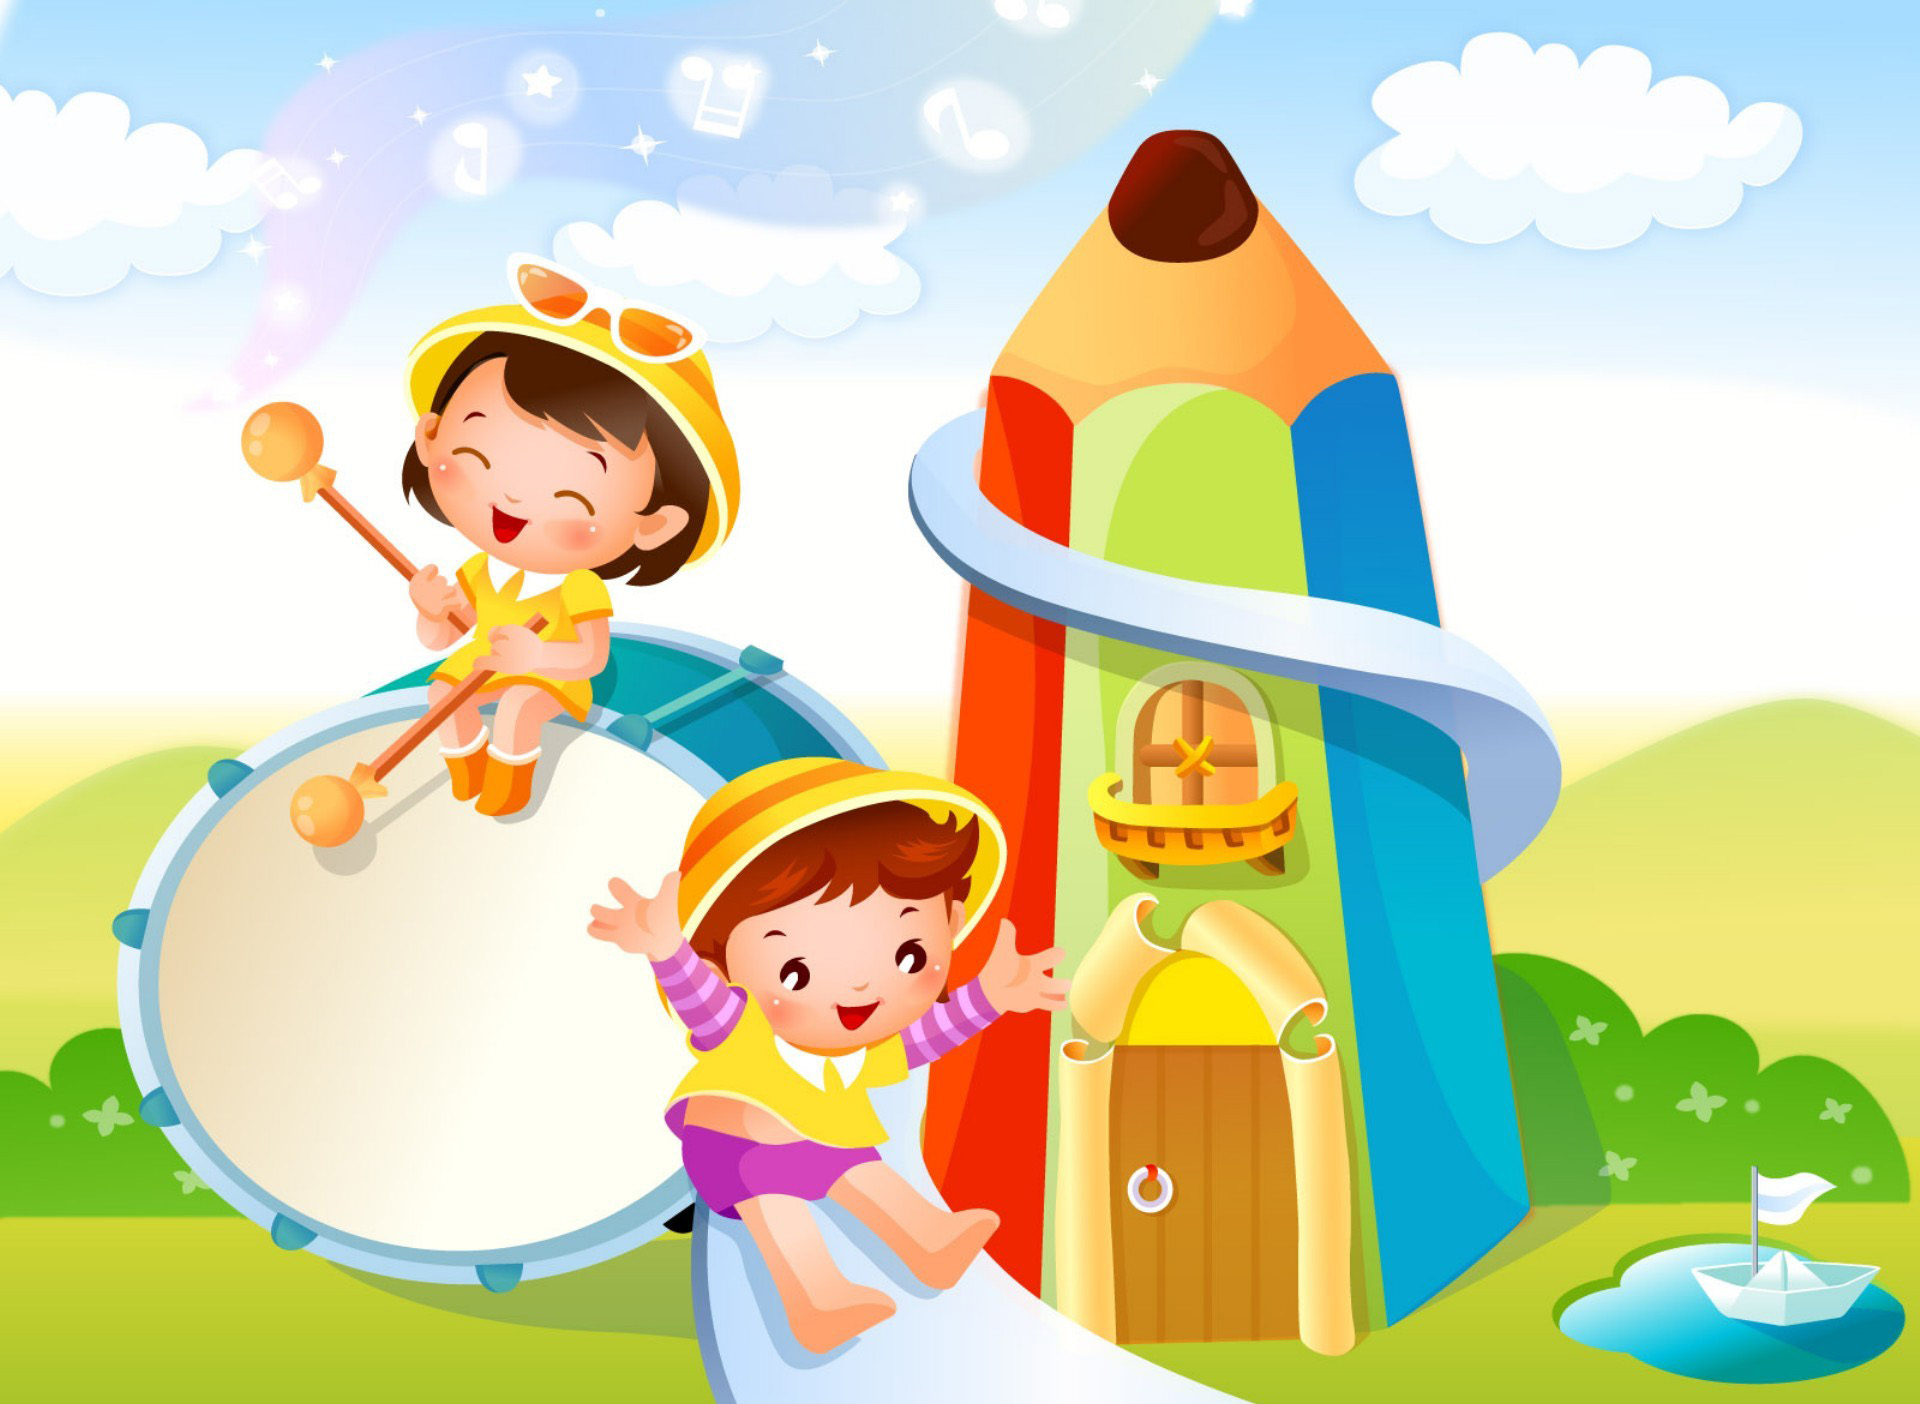 kid a wallpaper,cartoon,illustration,playing with kids,play,fun